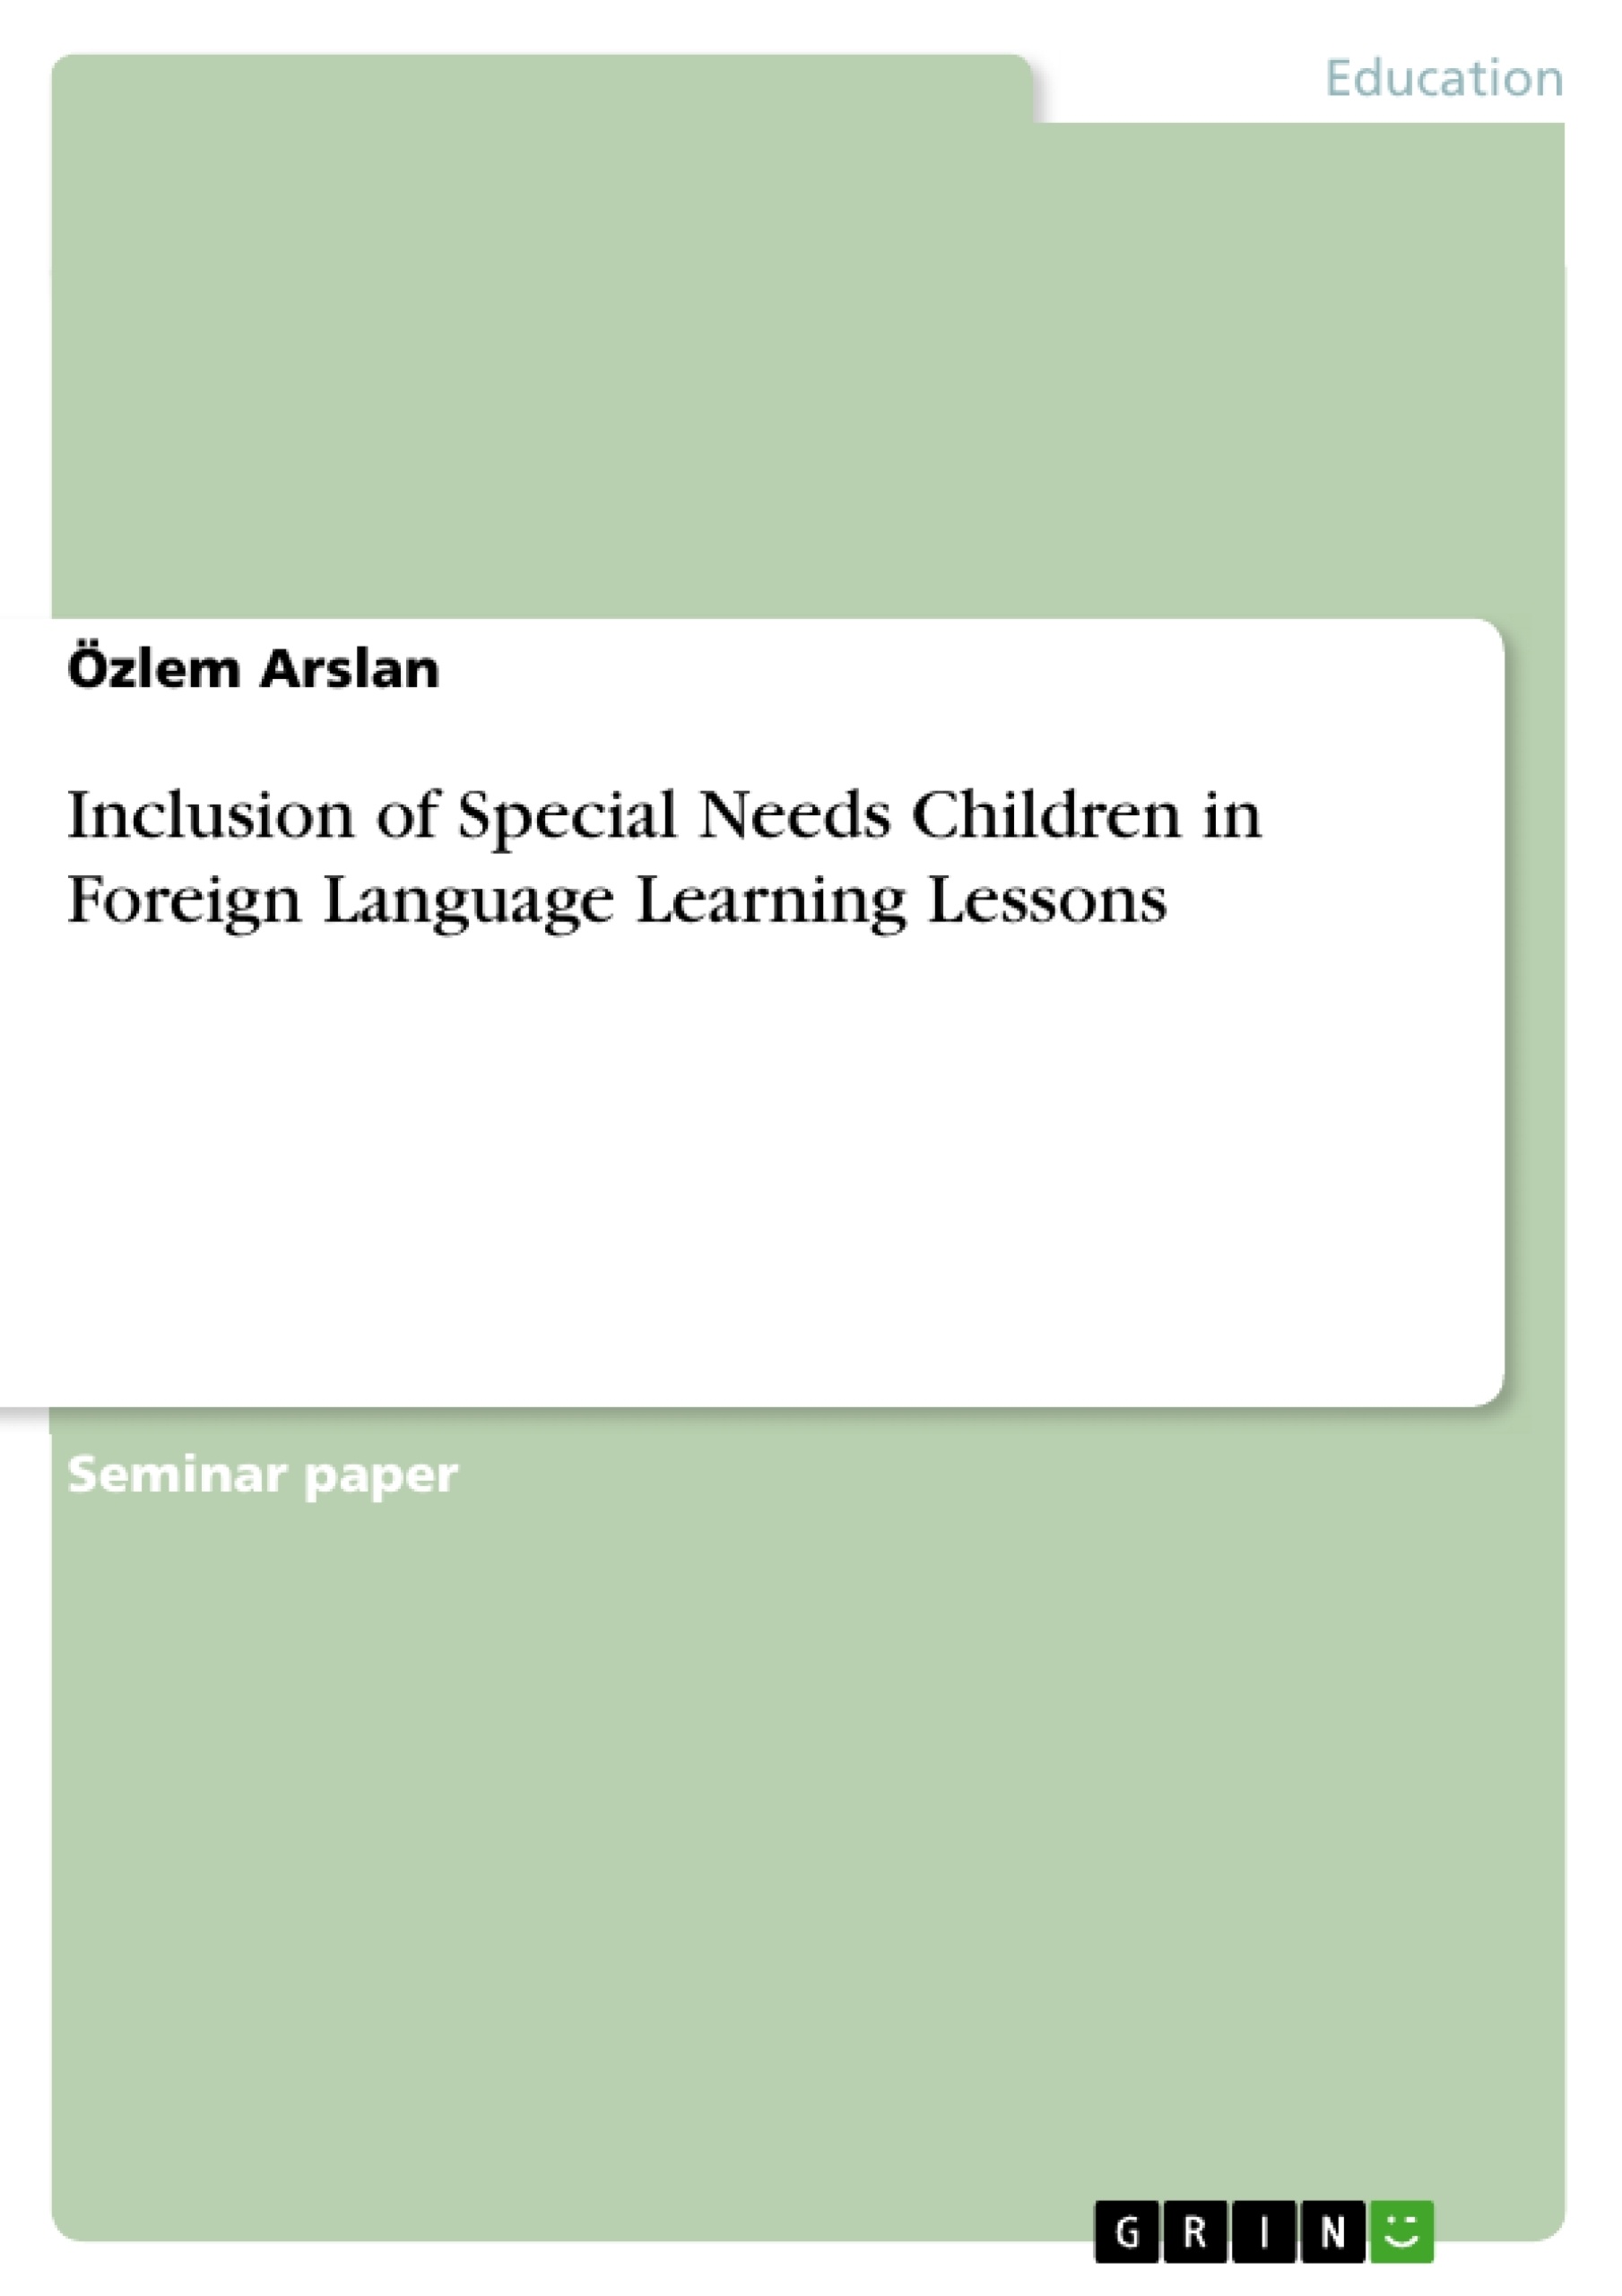 Título: Inclusion of Special Needs Children in Foreign Language Learning Lessons